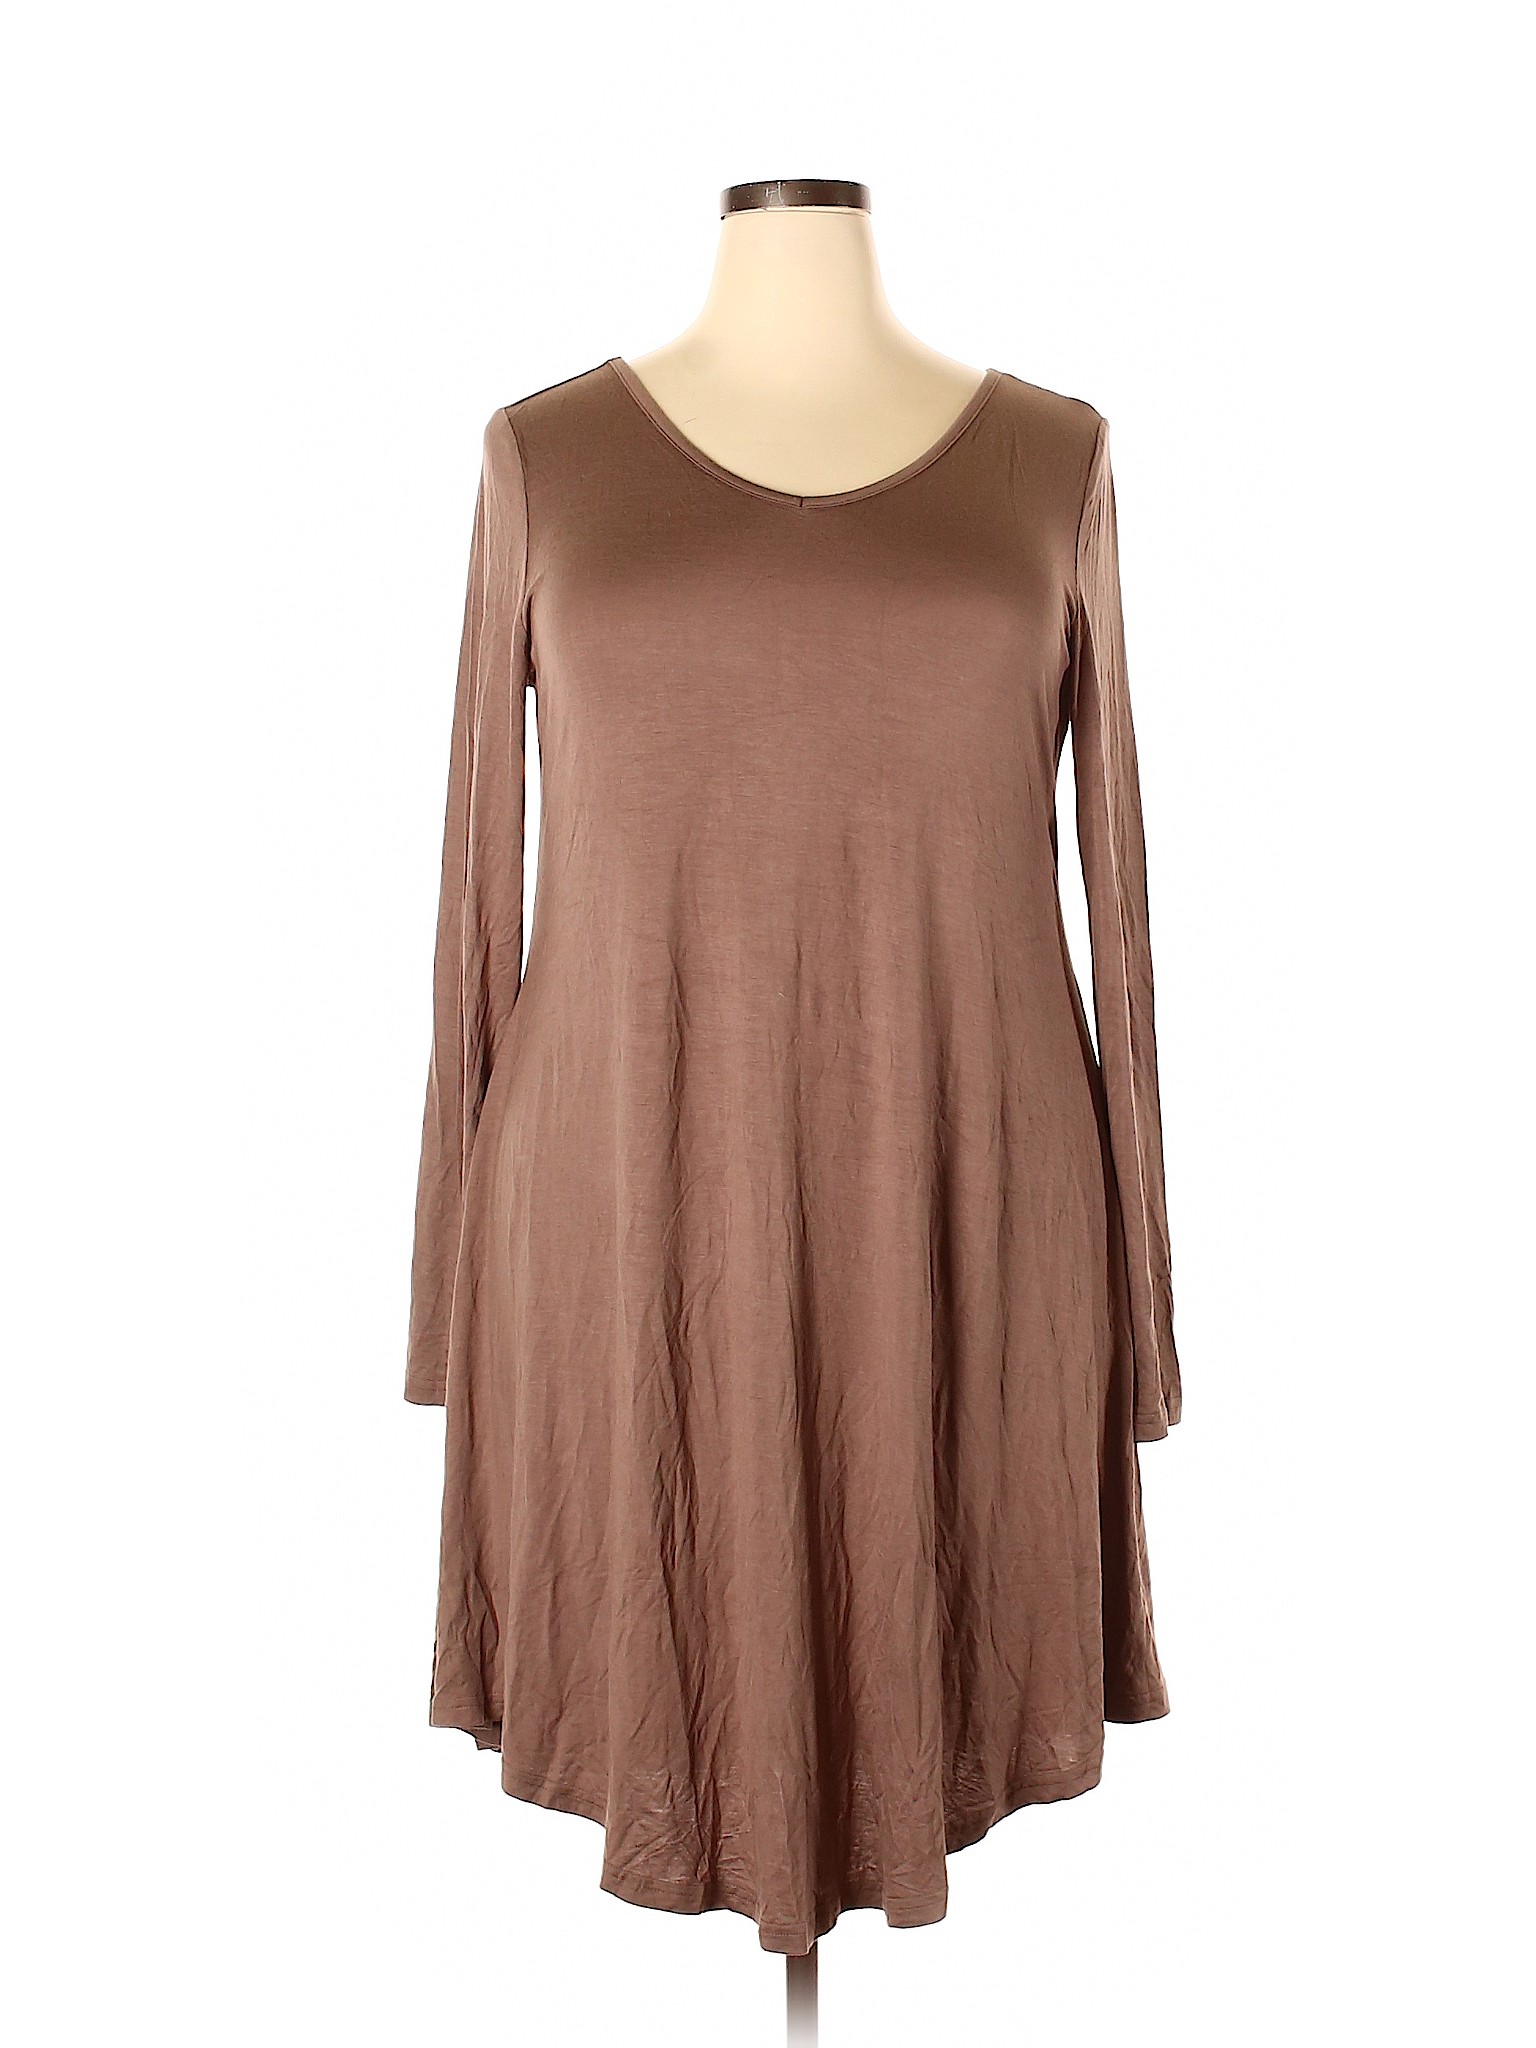 dearcase Solid Brown Casual Dress Size 3X (Plus) - 45% off | thredUP